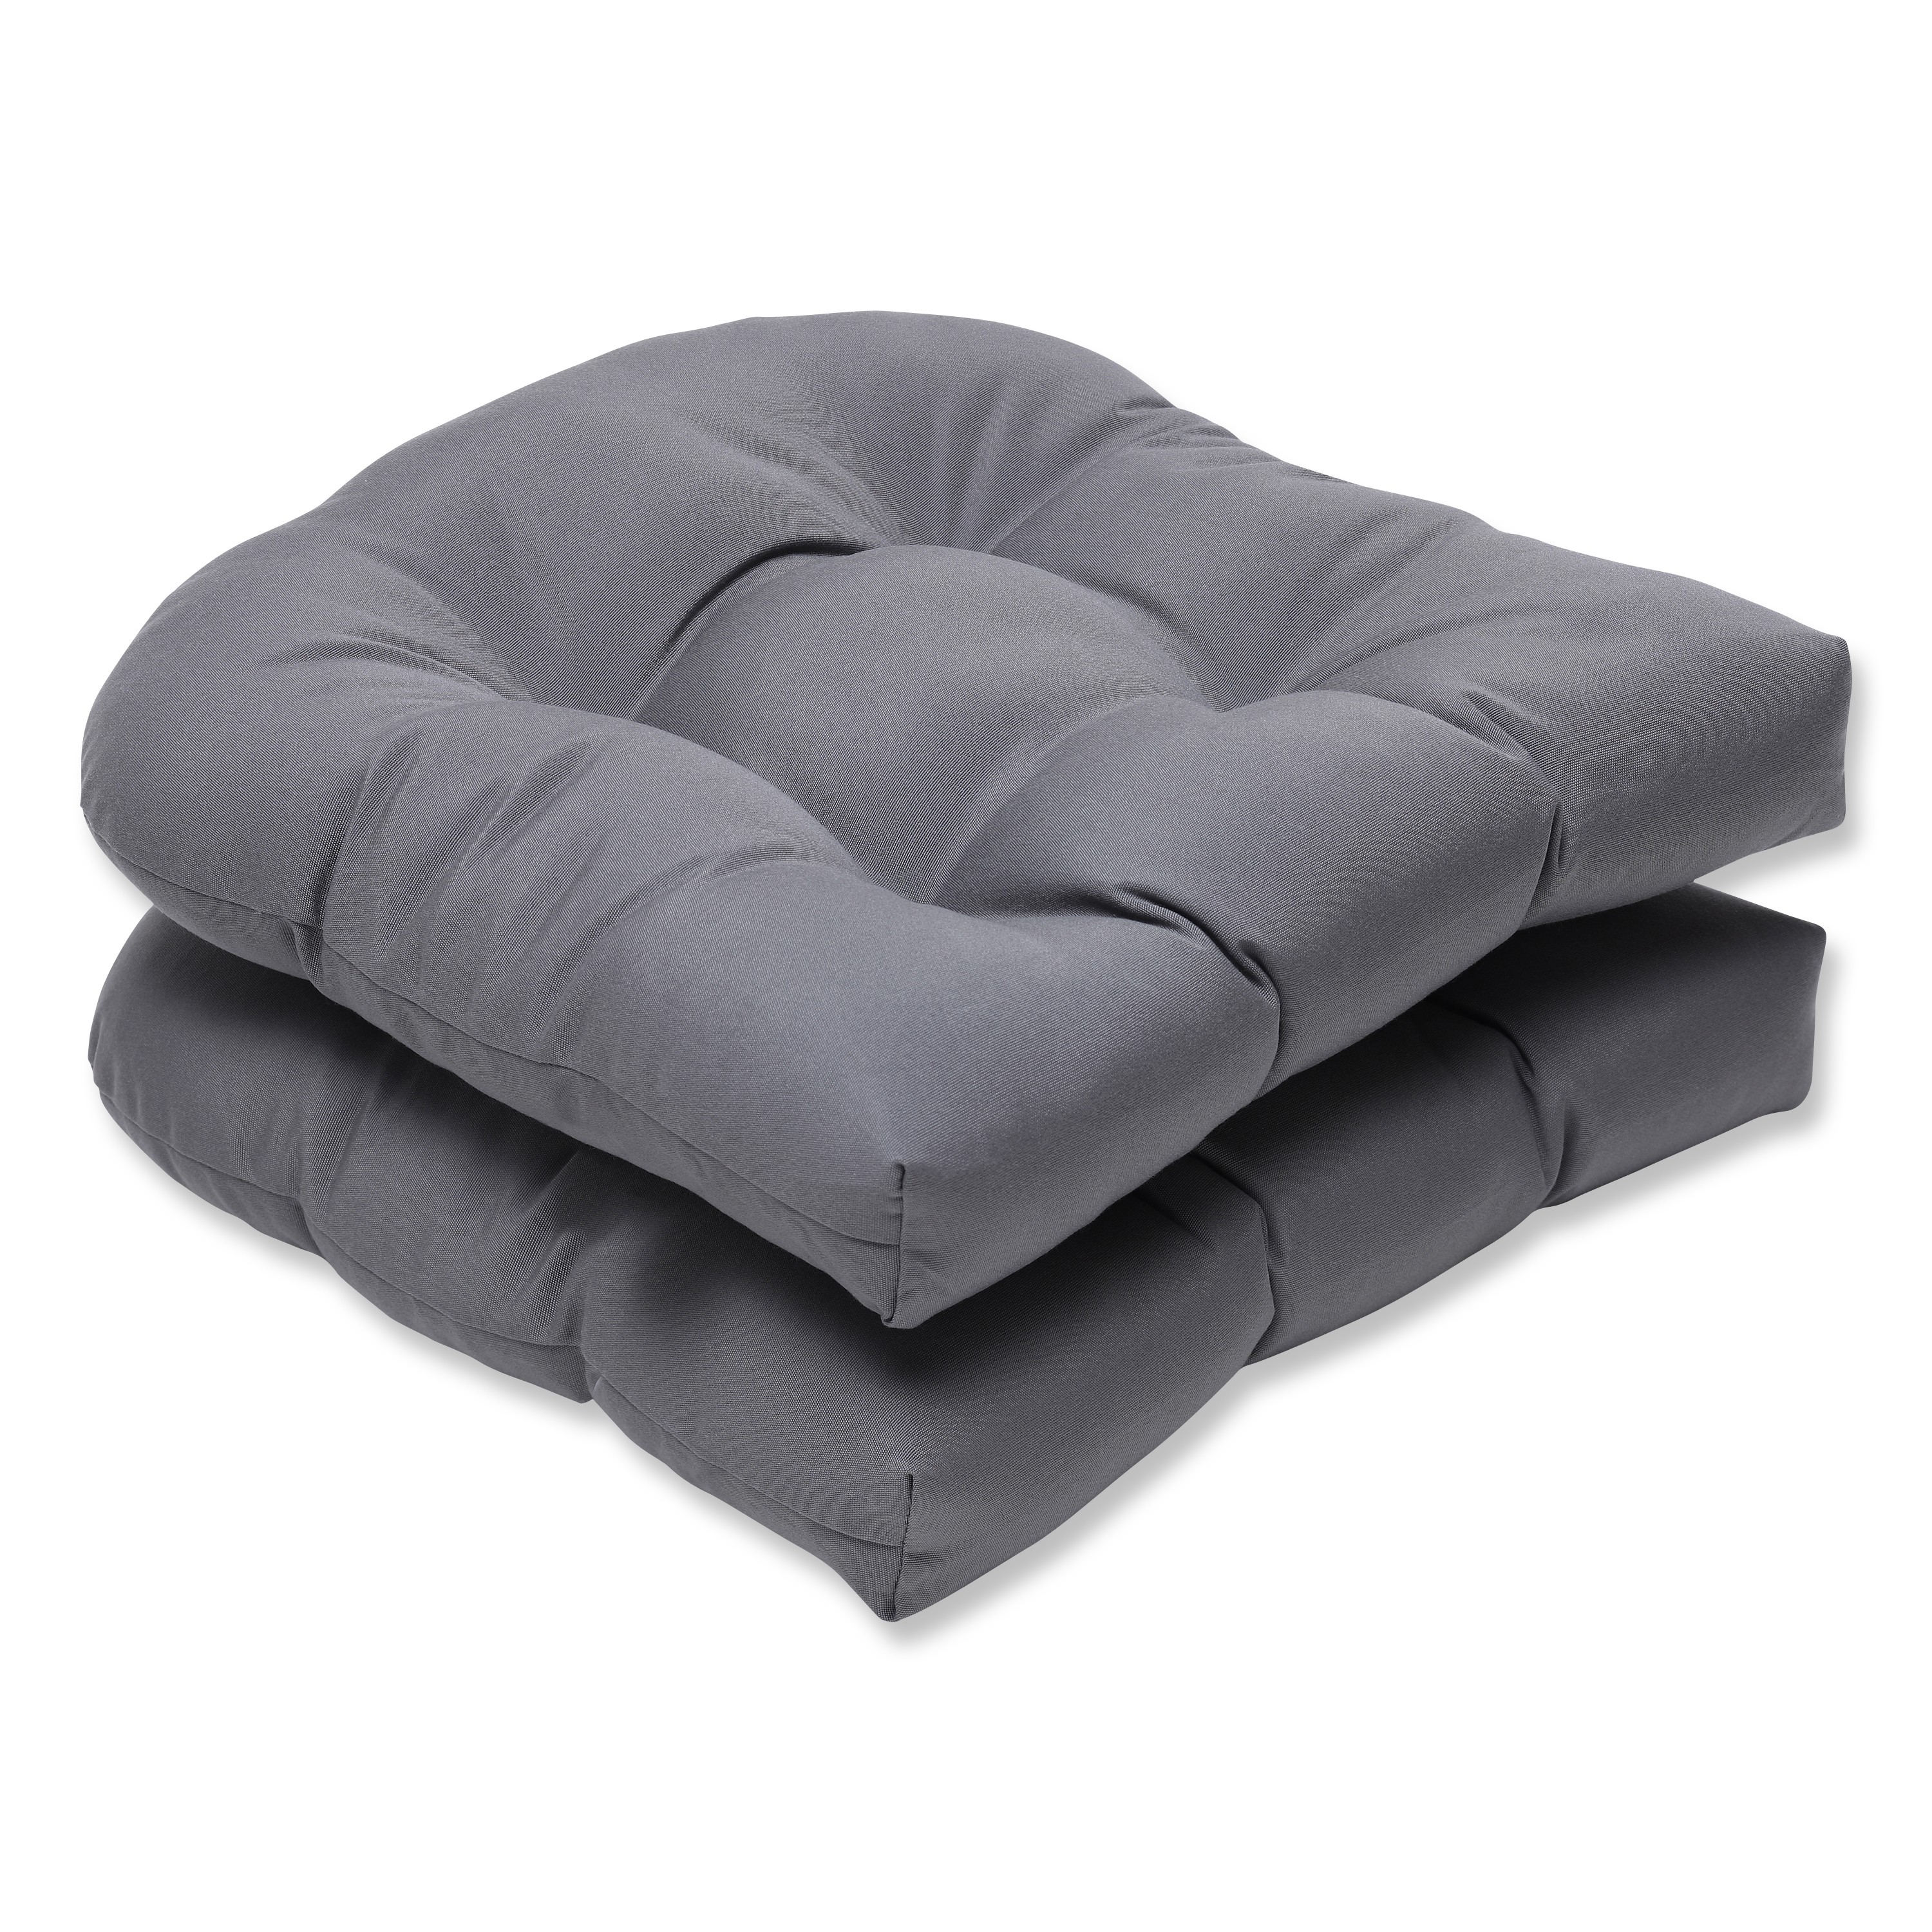 Pillow Perfect Set of 2 Gray Solid Tufted Outdoor Patio Wicker Seat Cushions 19"